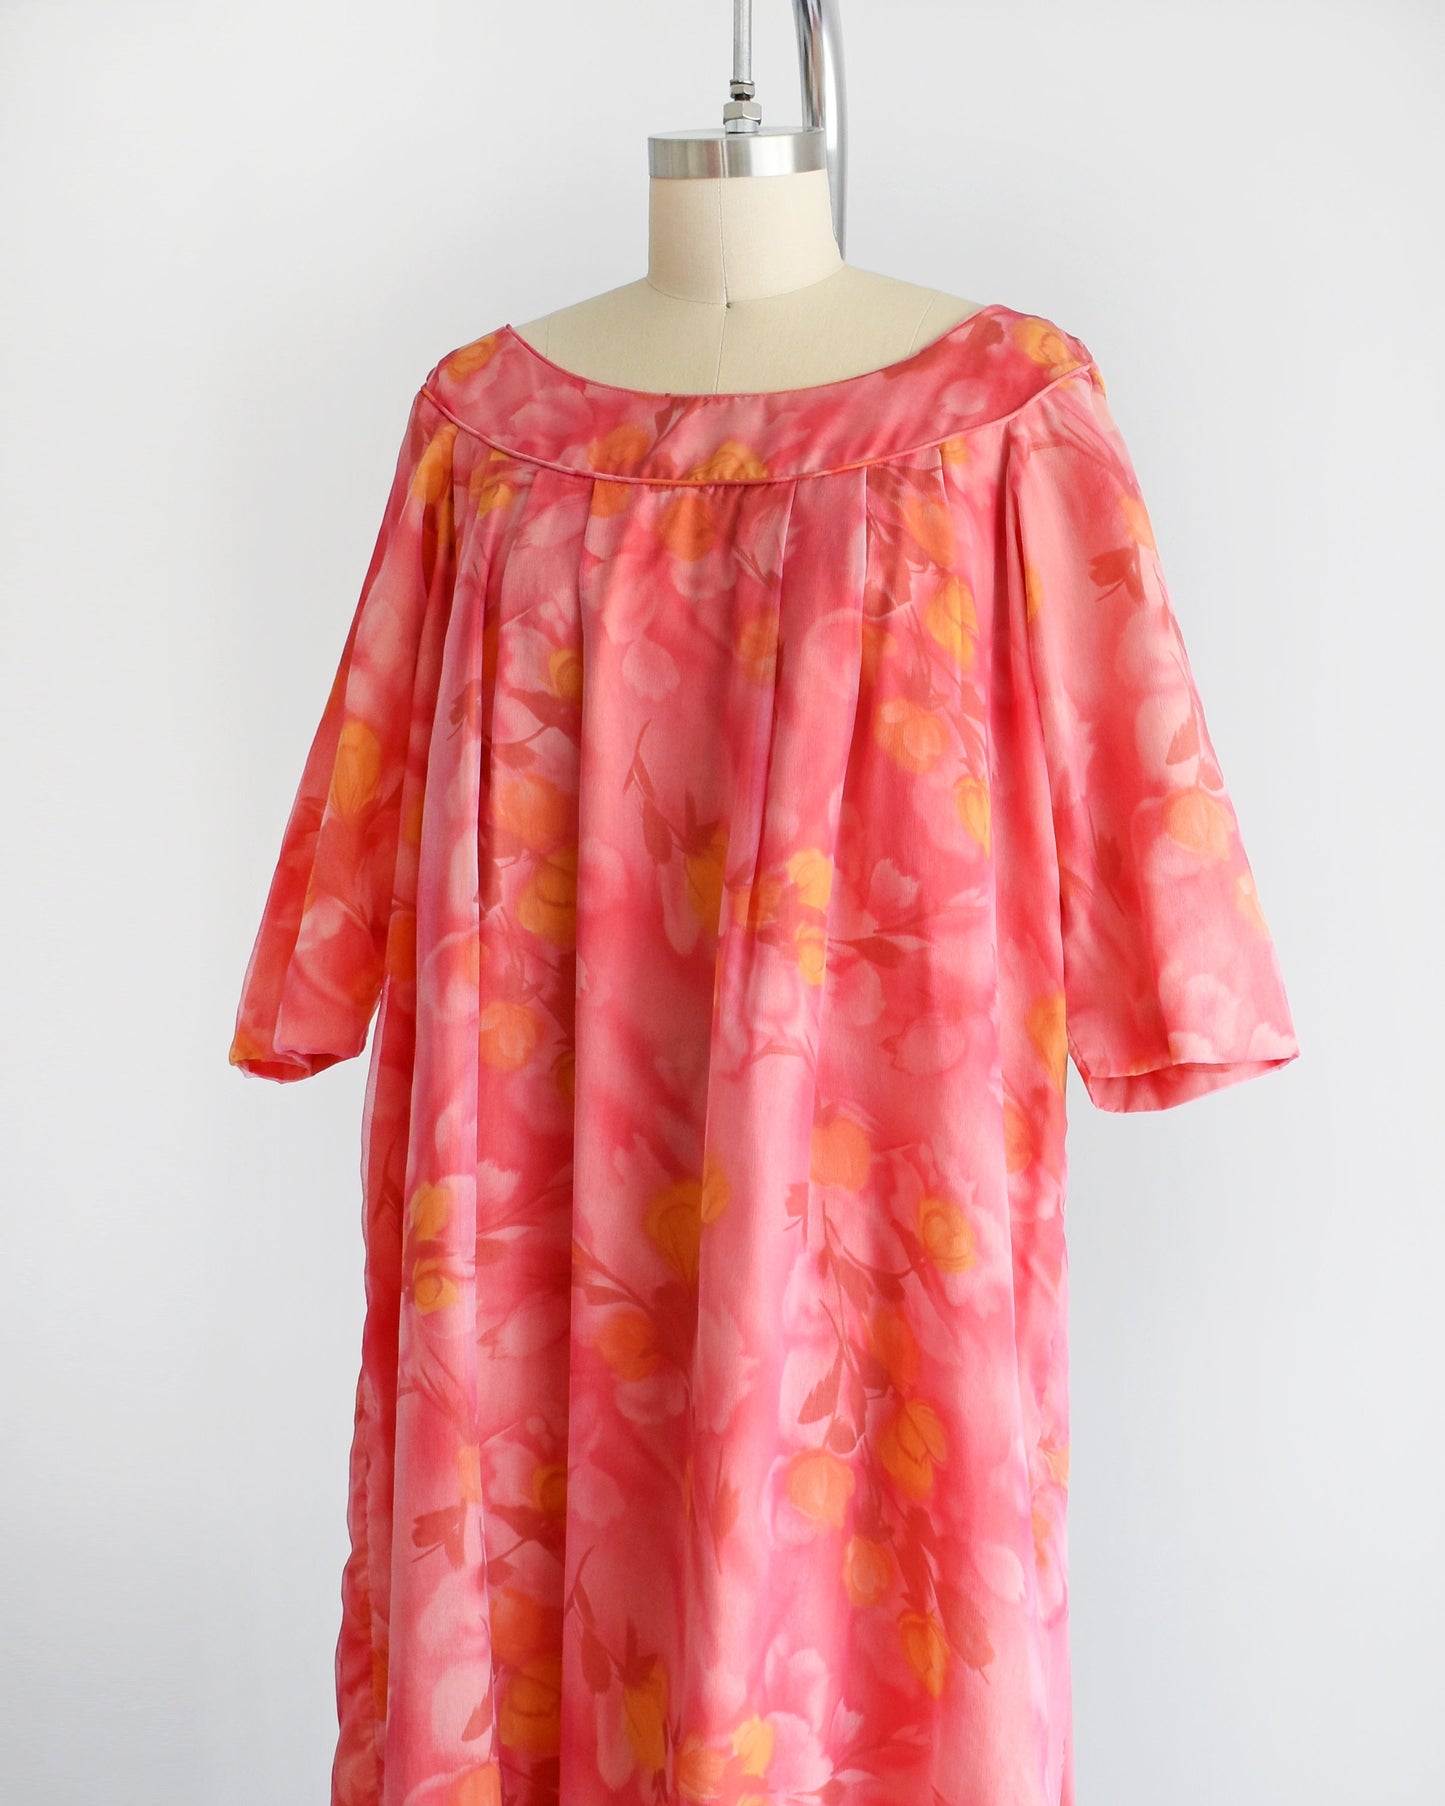 Side front view of a vintage floral maxi dress with pinks, dark red, orange, and yellow floral print. The dress has half sleeves and is on a dress form.